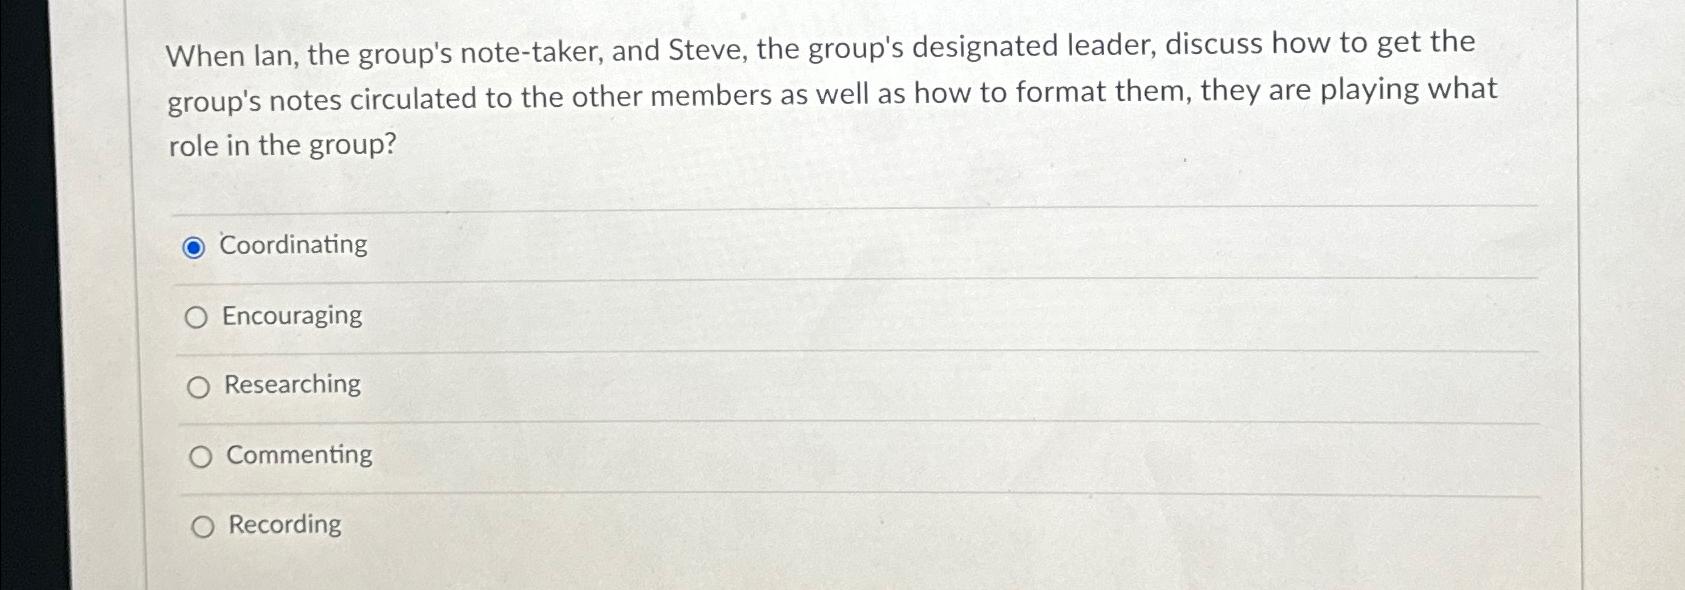 When lan, the group's note-taker, and Steve, the group's designated leader, discuss how to get the group's